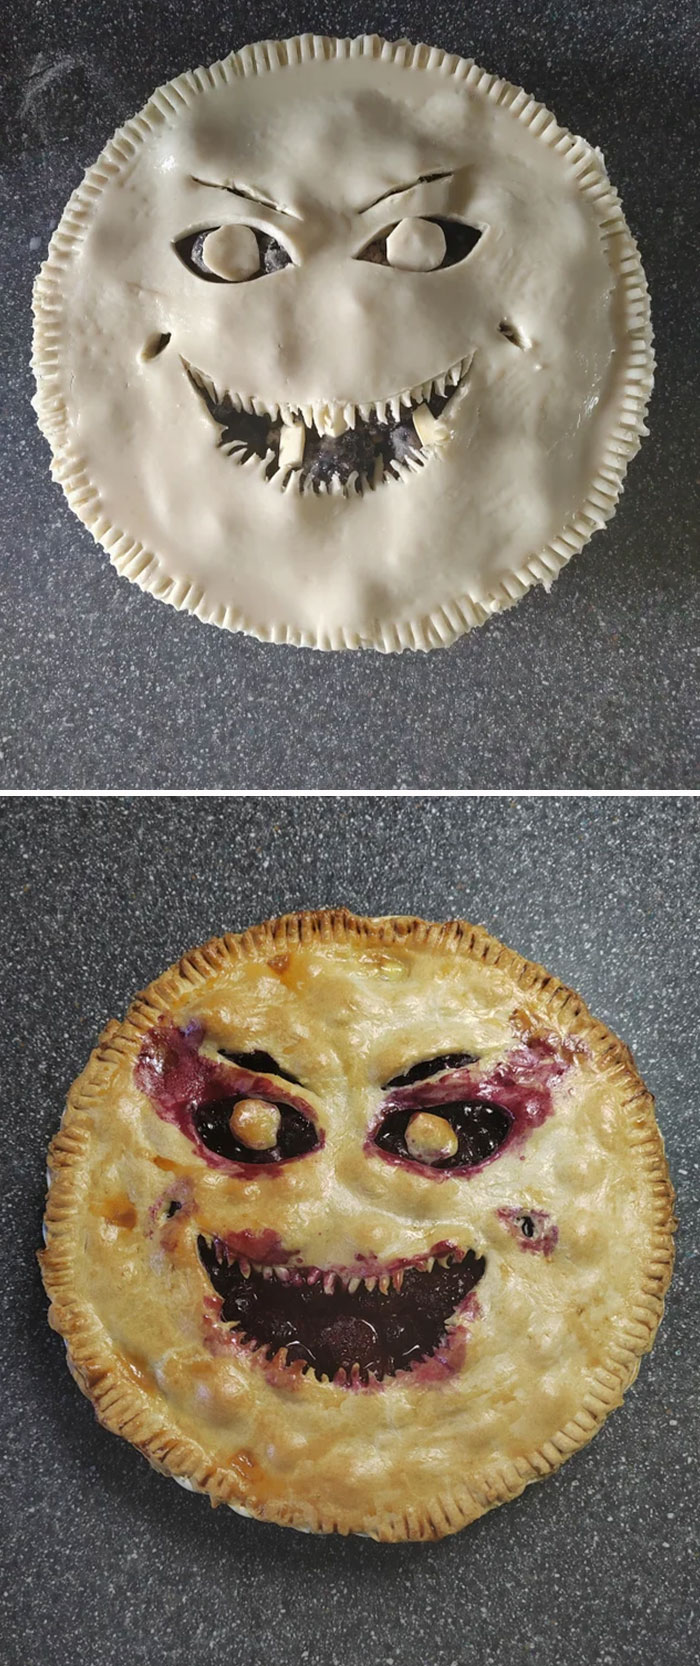 Scary Pie- Before And After Baking